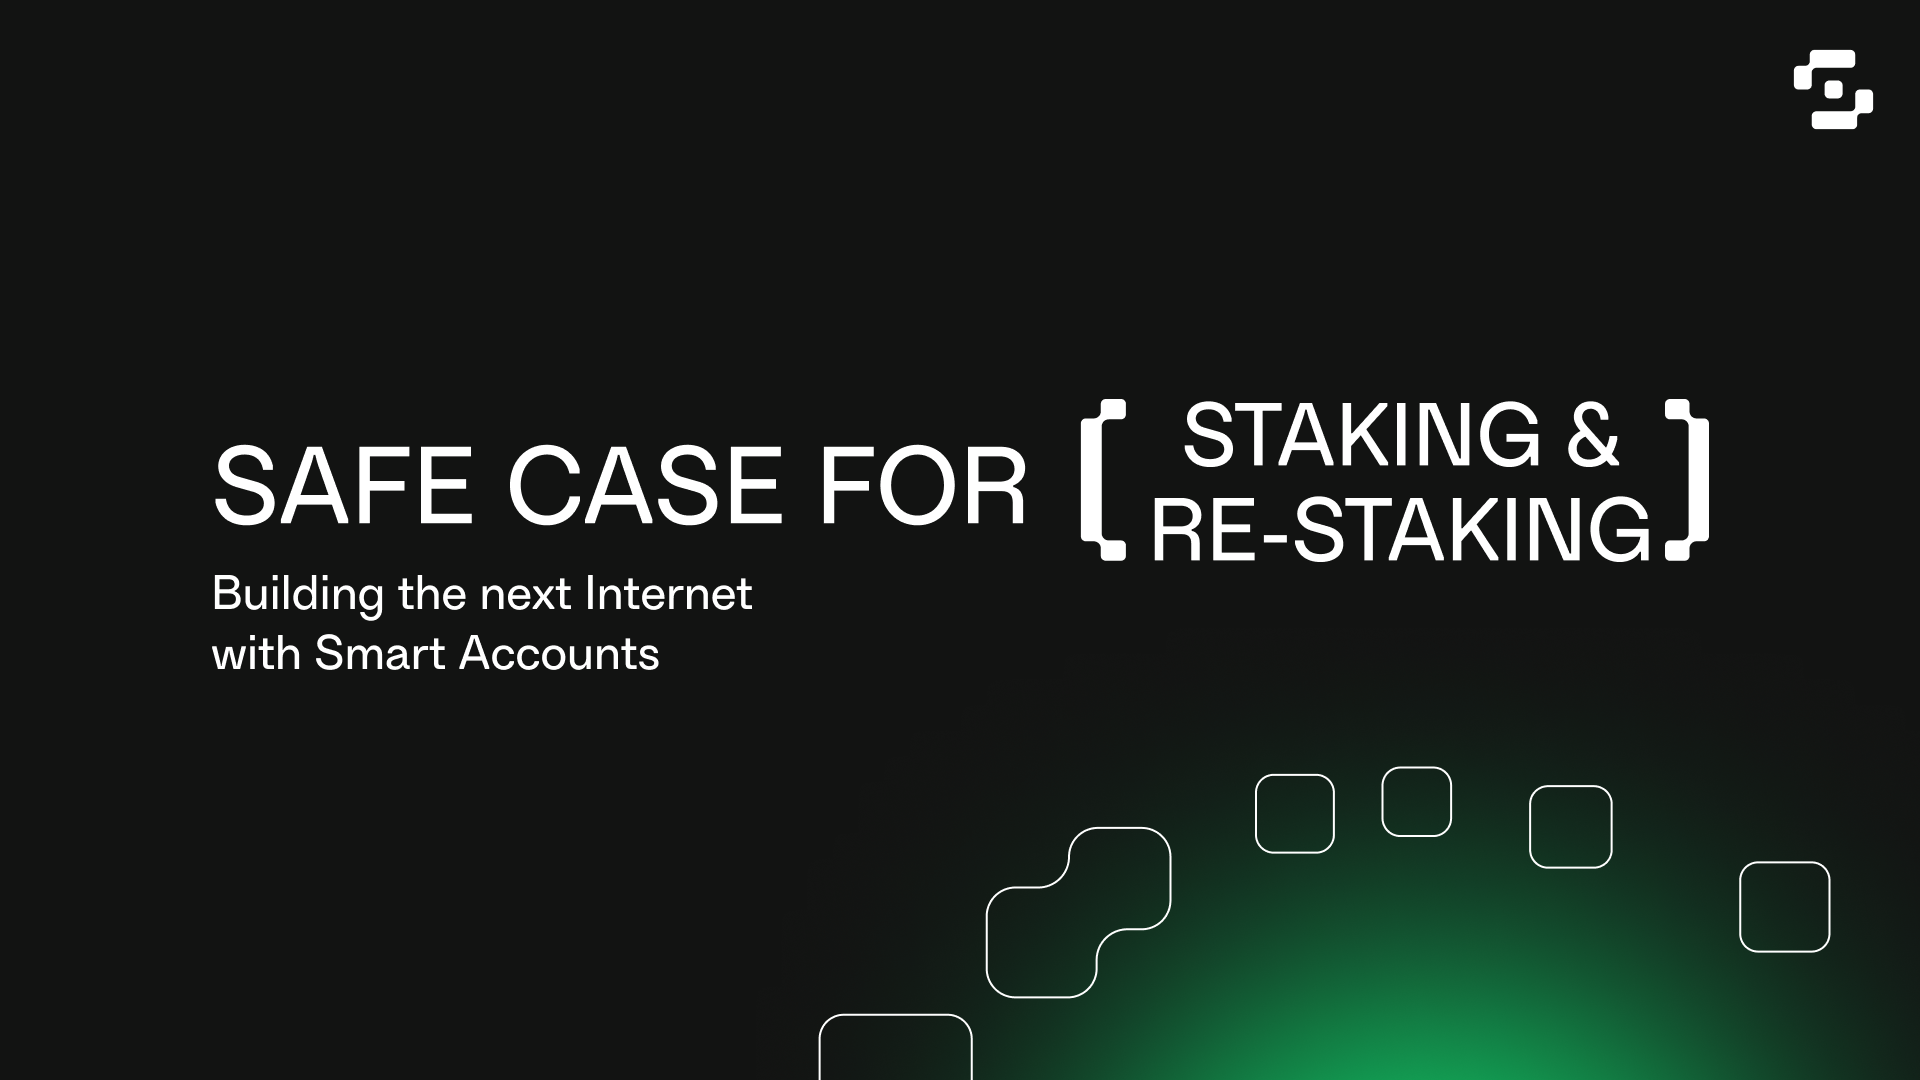 The Safe Case for Staking and Restaking